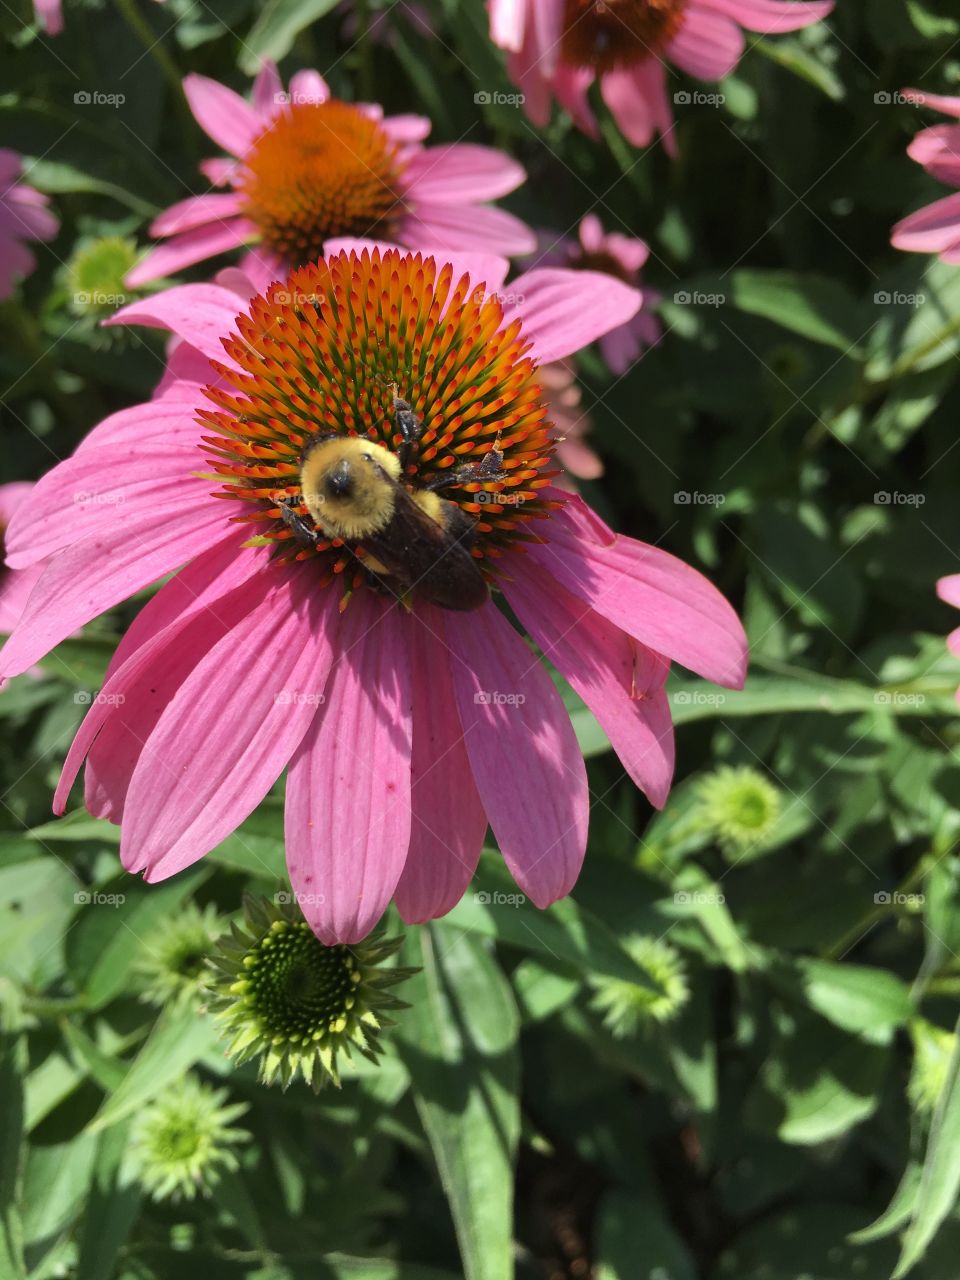 Flower and bee 🐝